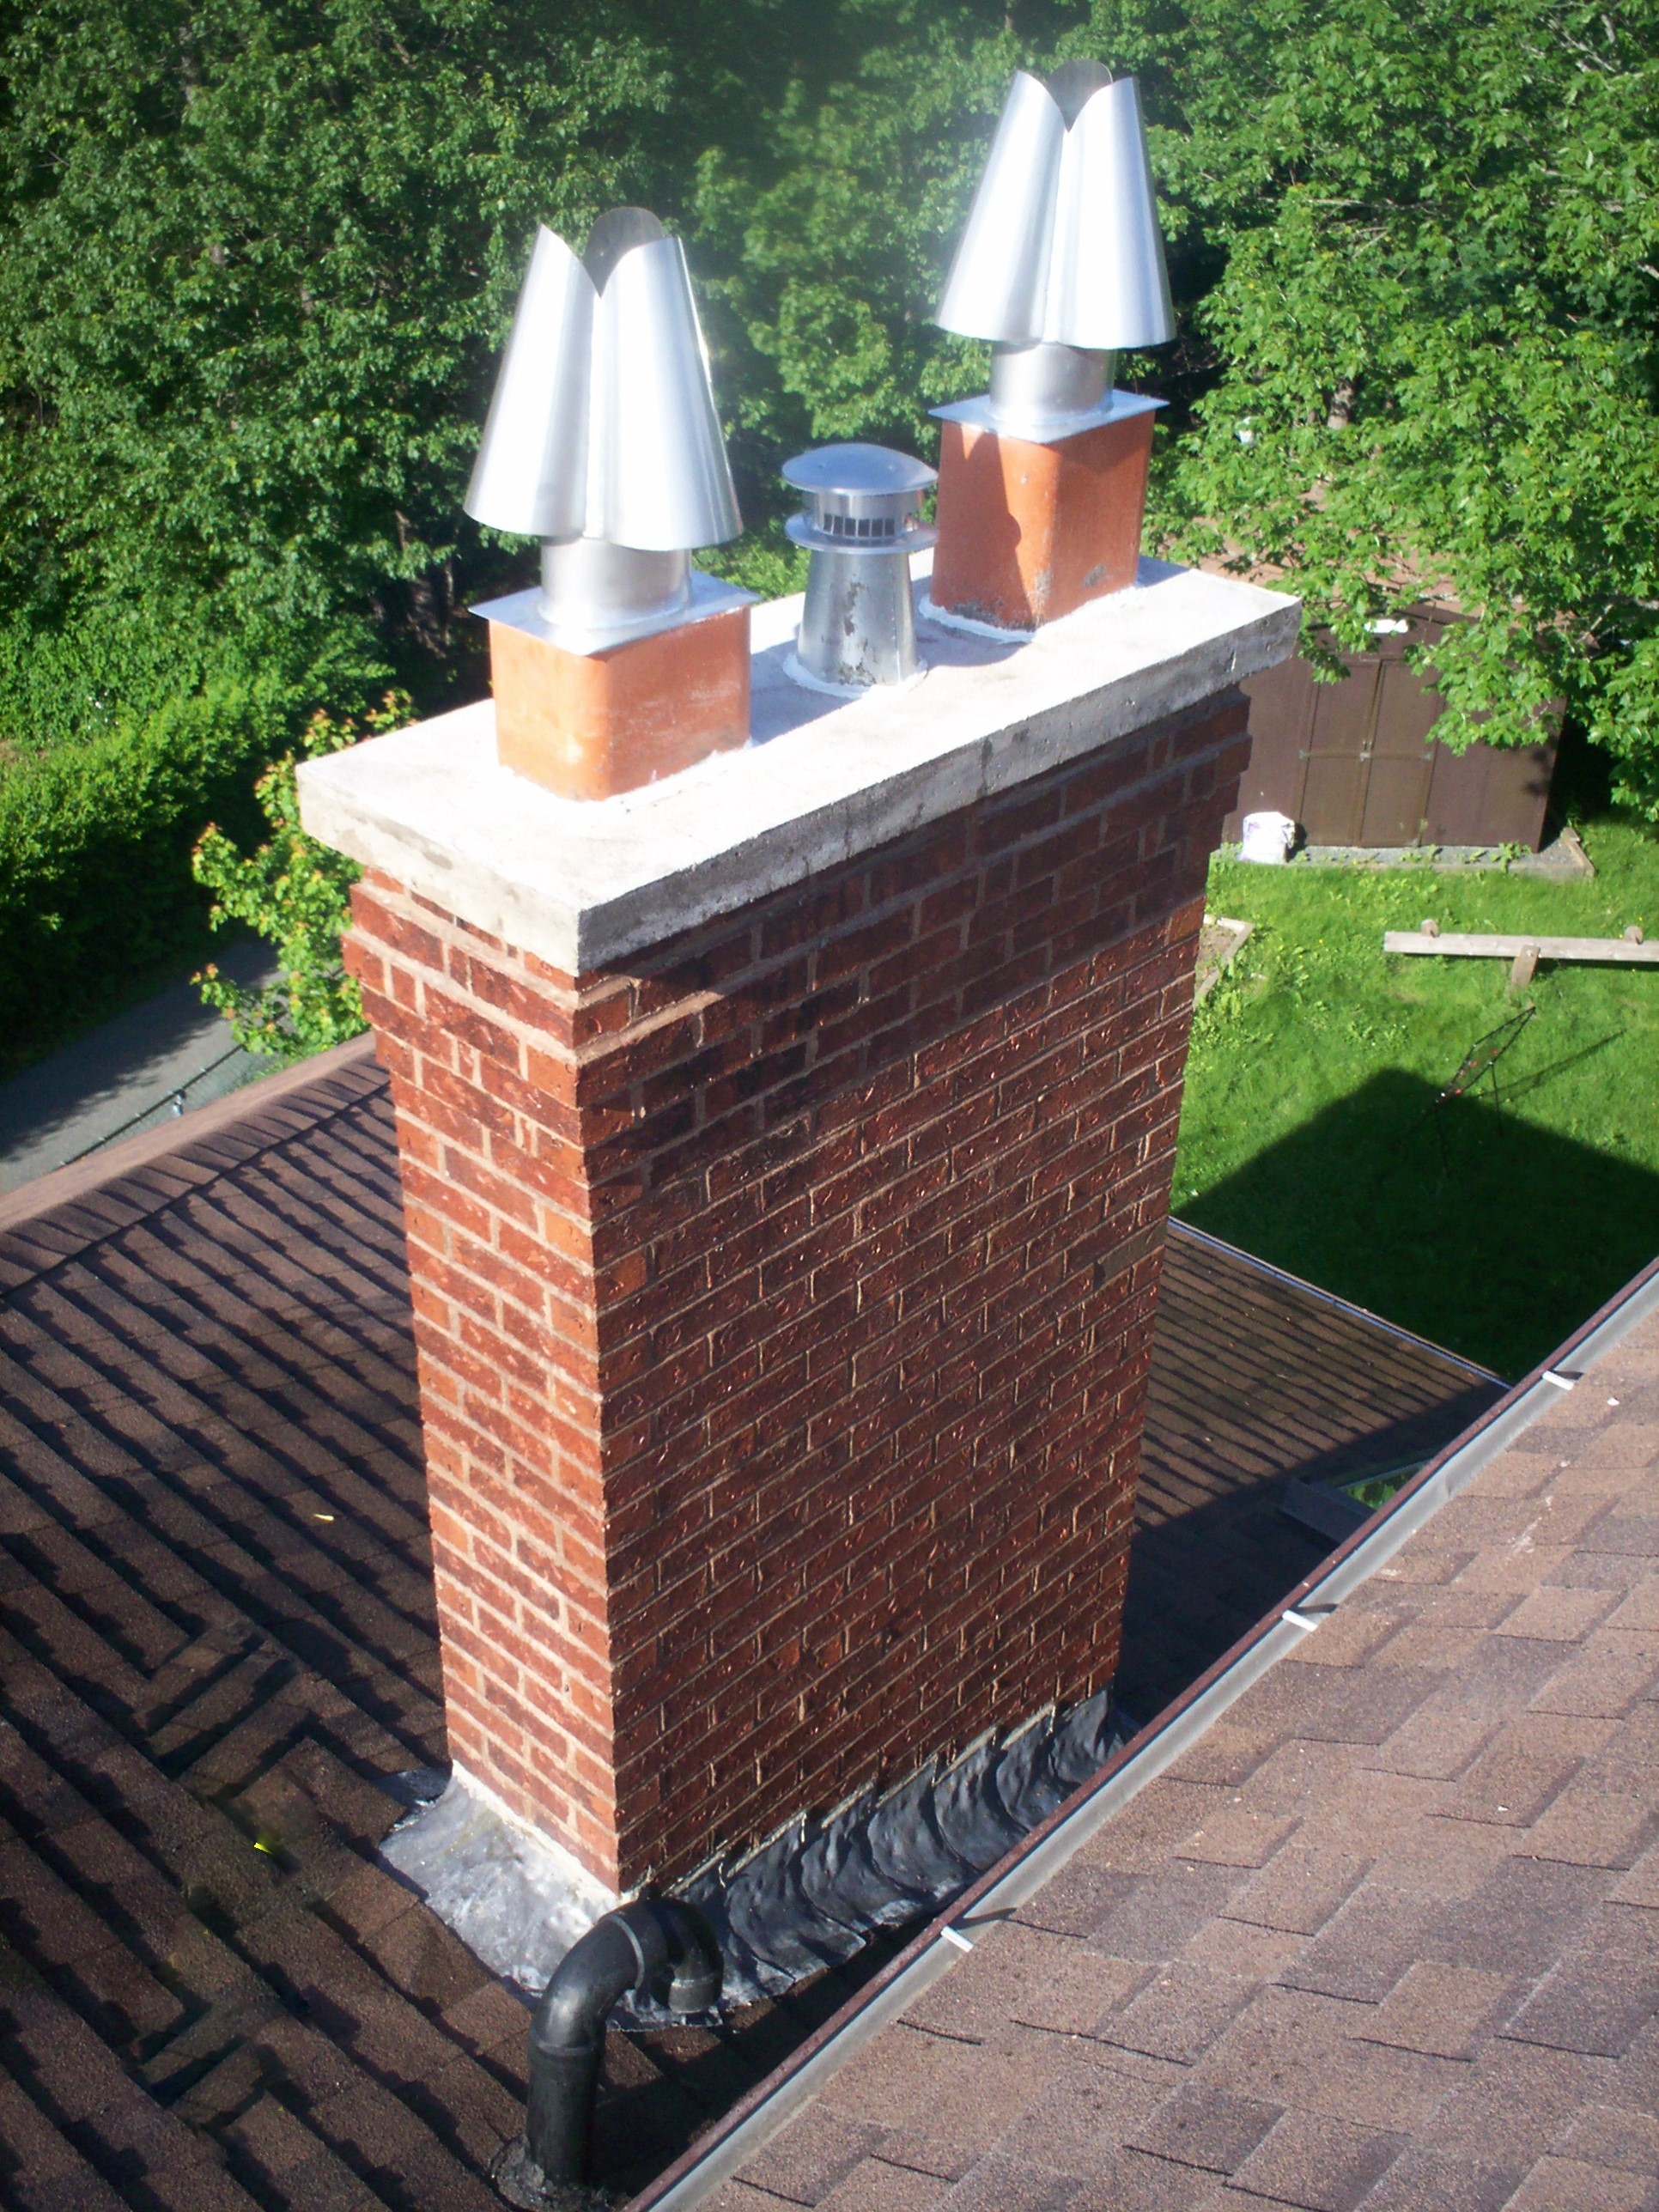 image of chimney repair-masonry chimney repair services completed in Halifax-Dartmouth Regional Municipality, NS by Pro Chimney Services based in Halifax, NS servicing all of the Halifax-Dartmouth Regional Municipality, Bedford, Sackville, Mount Uniacke, Windsor, Hantsport , Wolfville, Kentville, Chester, Mahone Bay, Lunenburg, Bridgewater, Liverpool, Fall River, Wellington, Enfield, Elmsdale, Brookfield, Truro, Musquodoboit Harbour & surrounding areas.